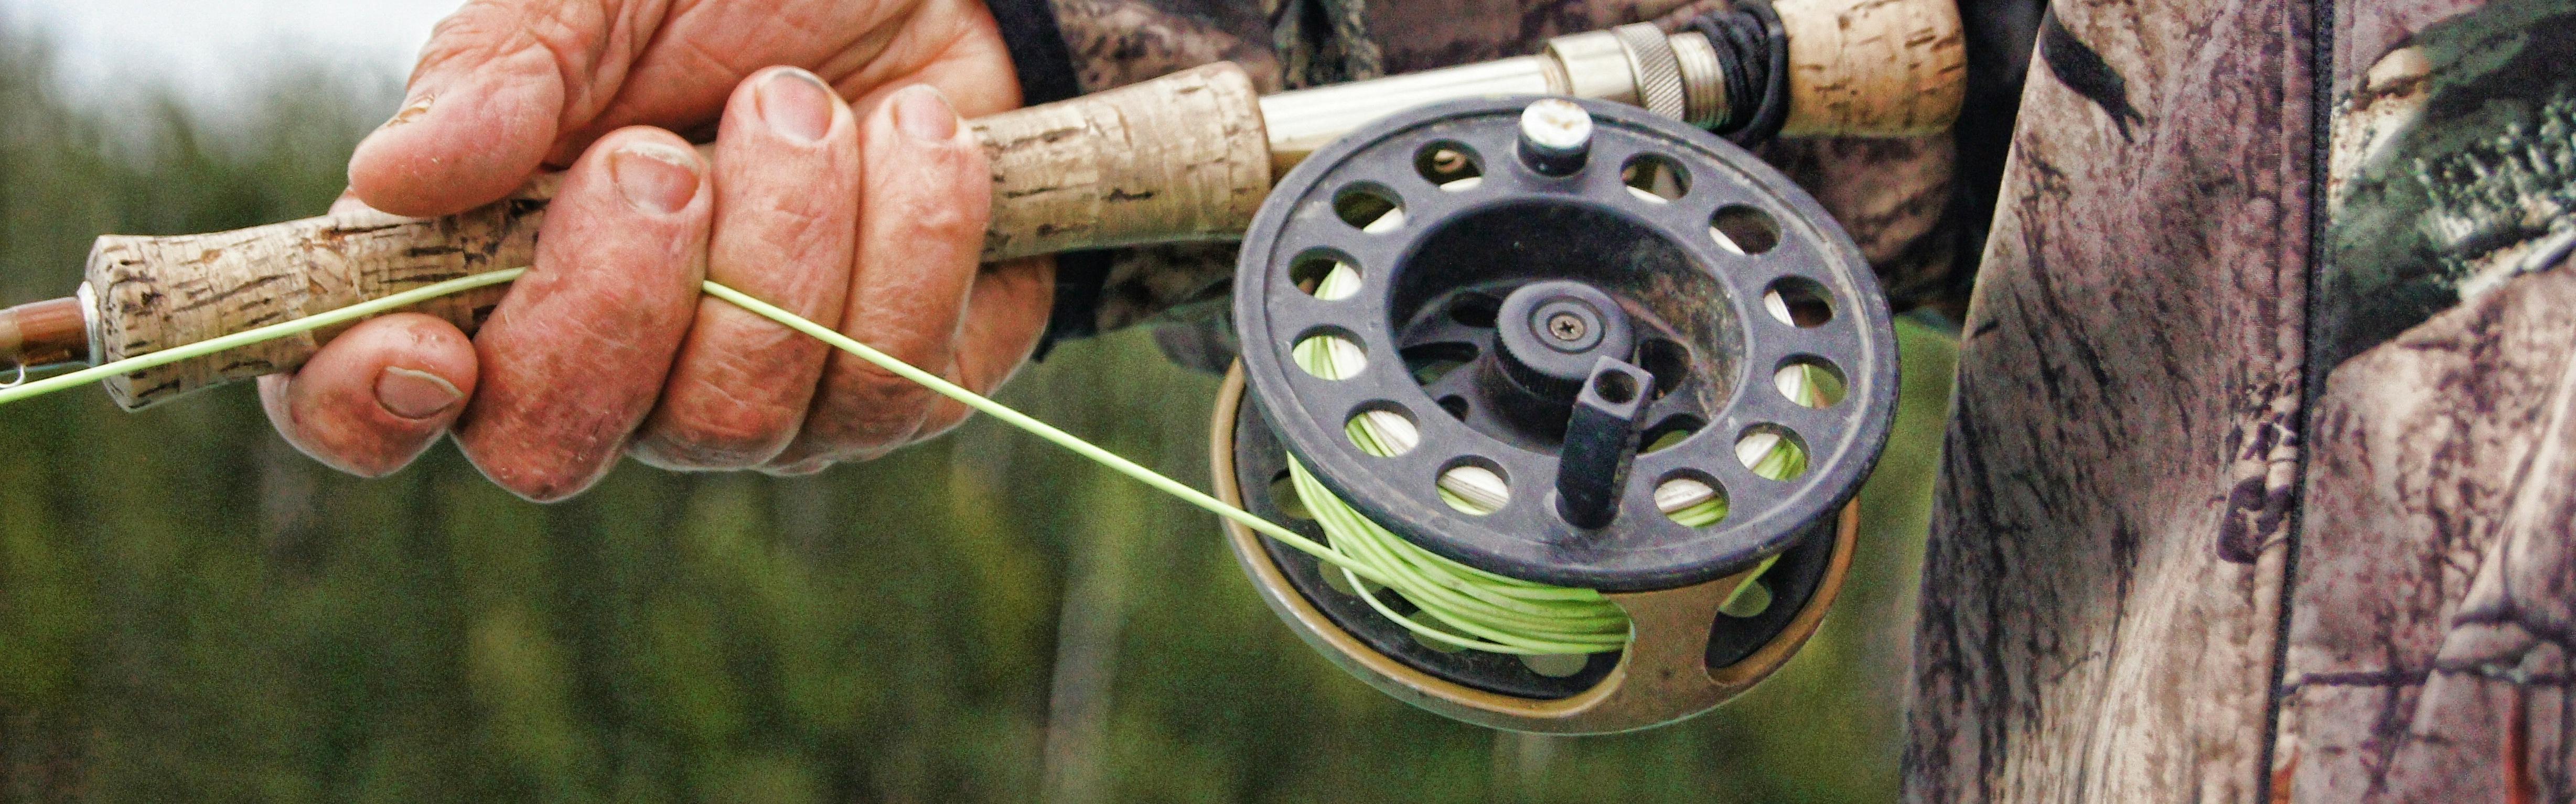 How to Care for Your Fishing Gear